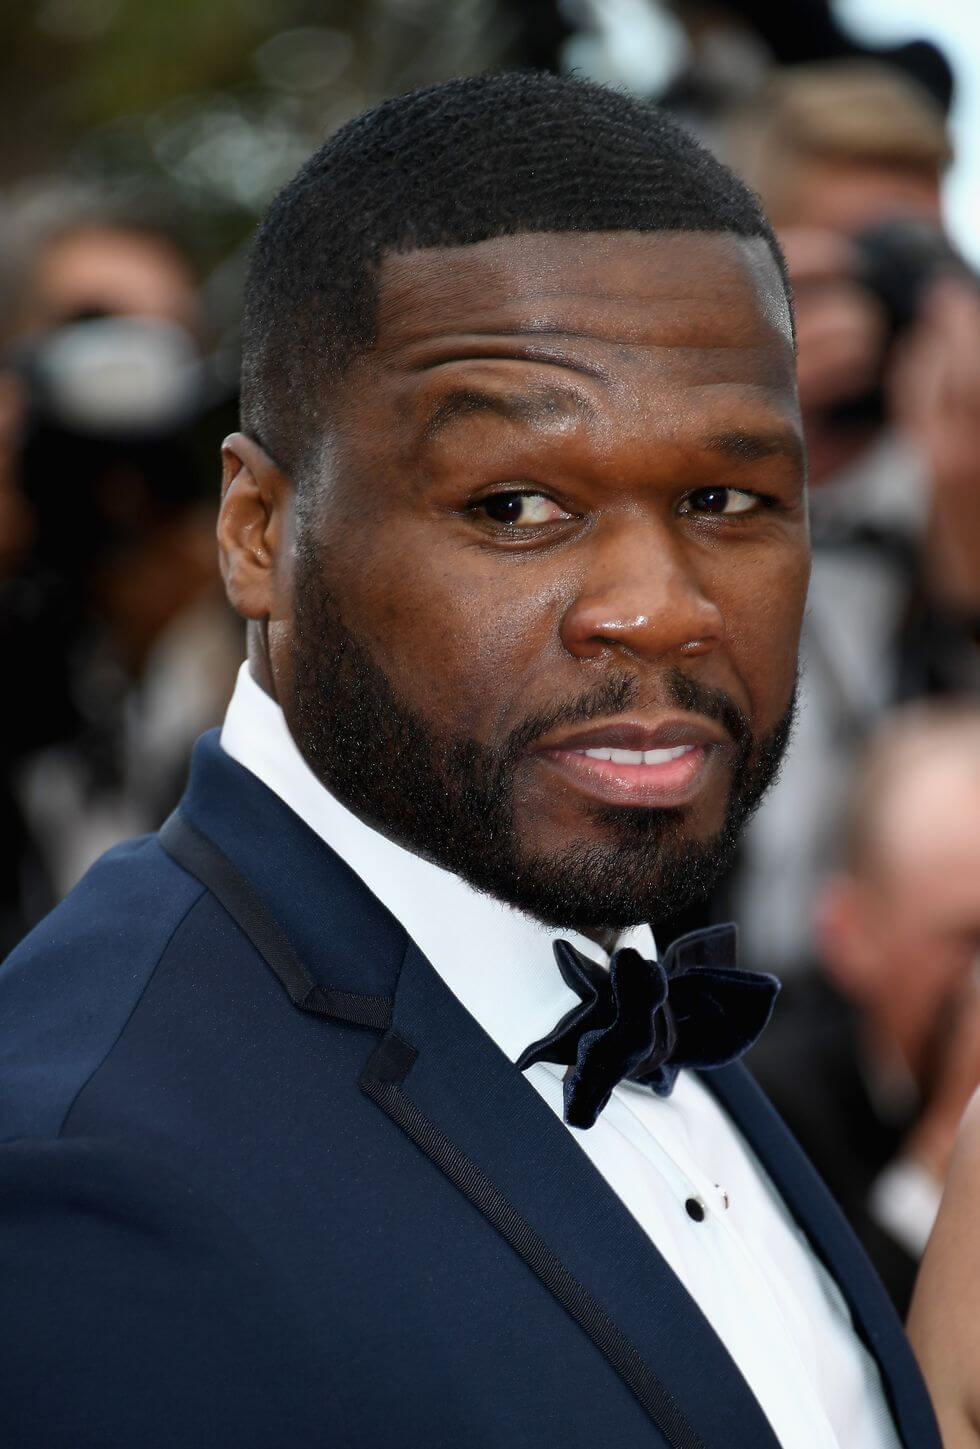 celebrities don't drink alcohol_50 Cent